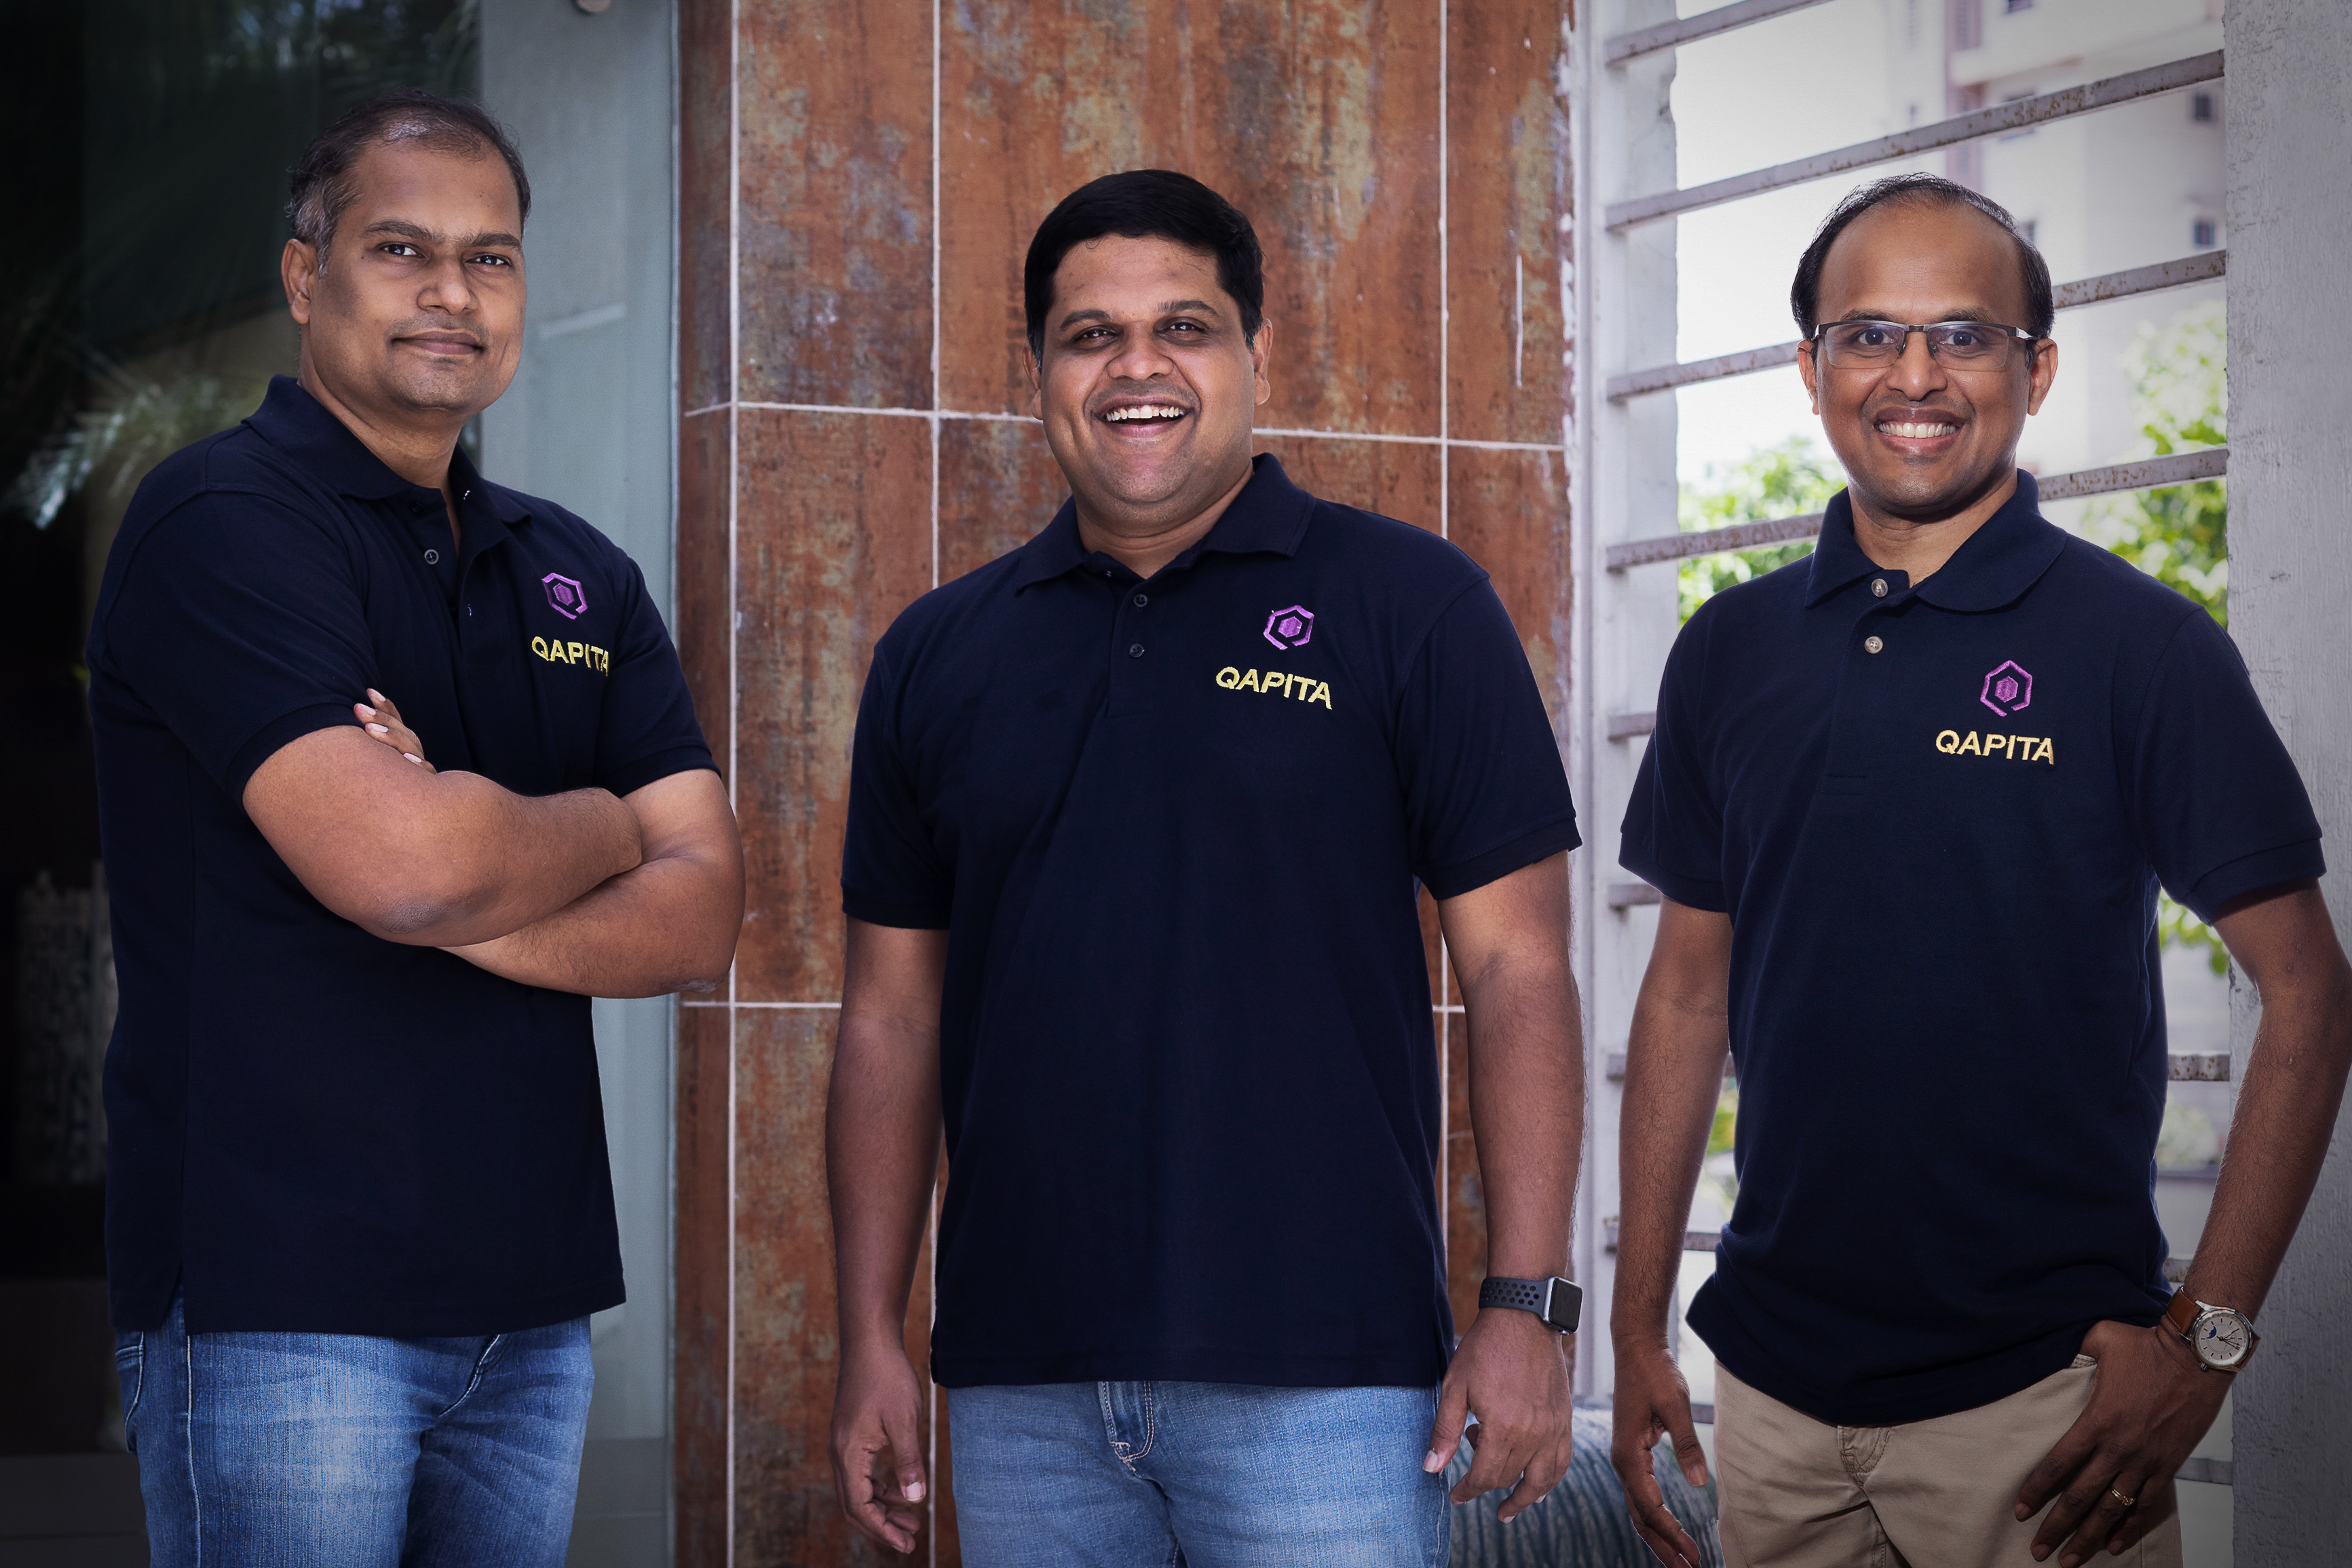 A group photo of Qapita's co-founders. From left to right: Vamsee Mohan, Ravi Ravulaparthi and Lakshman Gupta